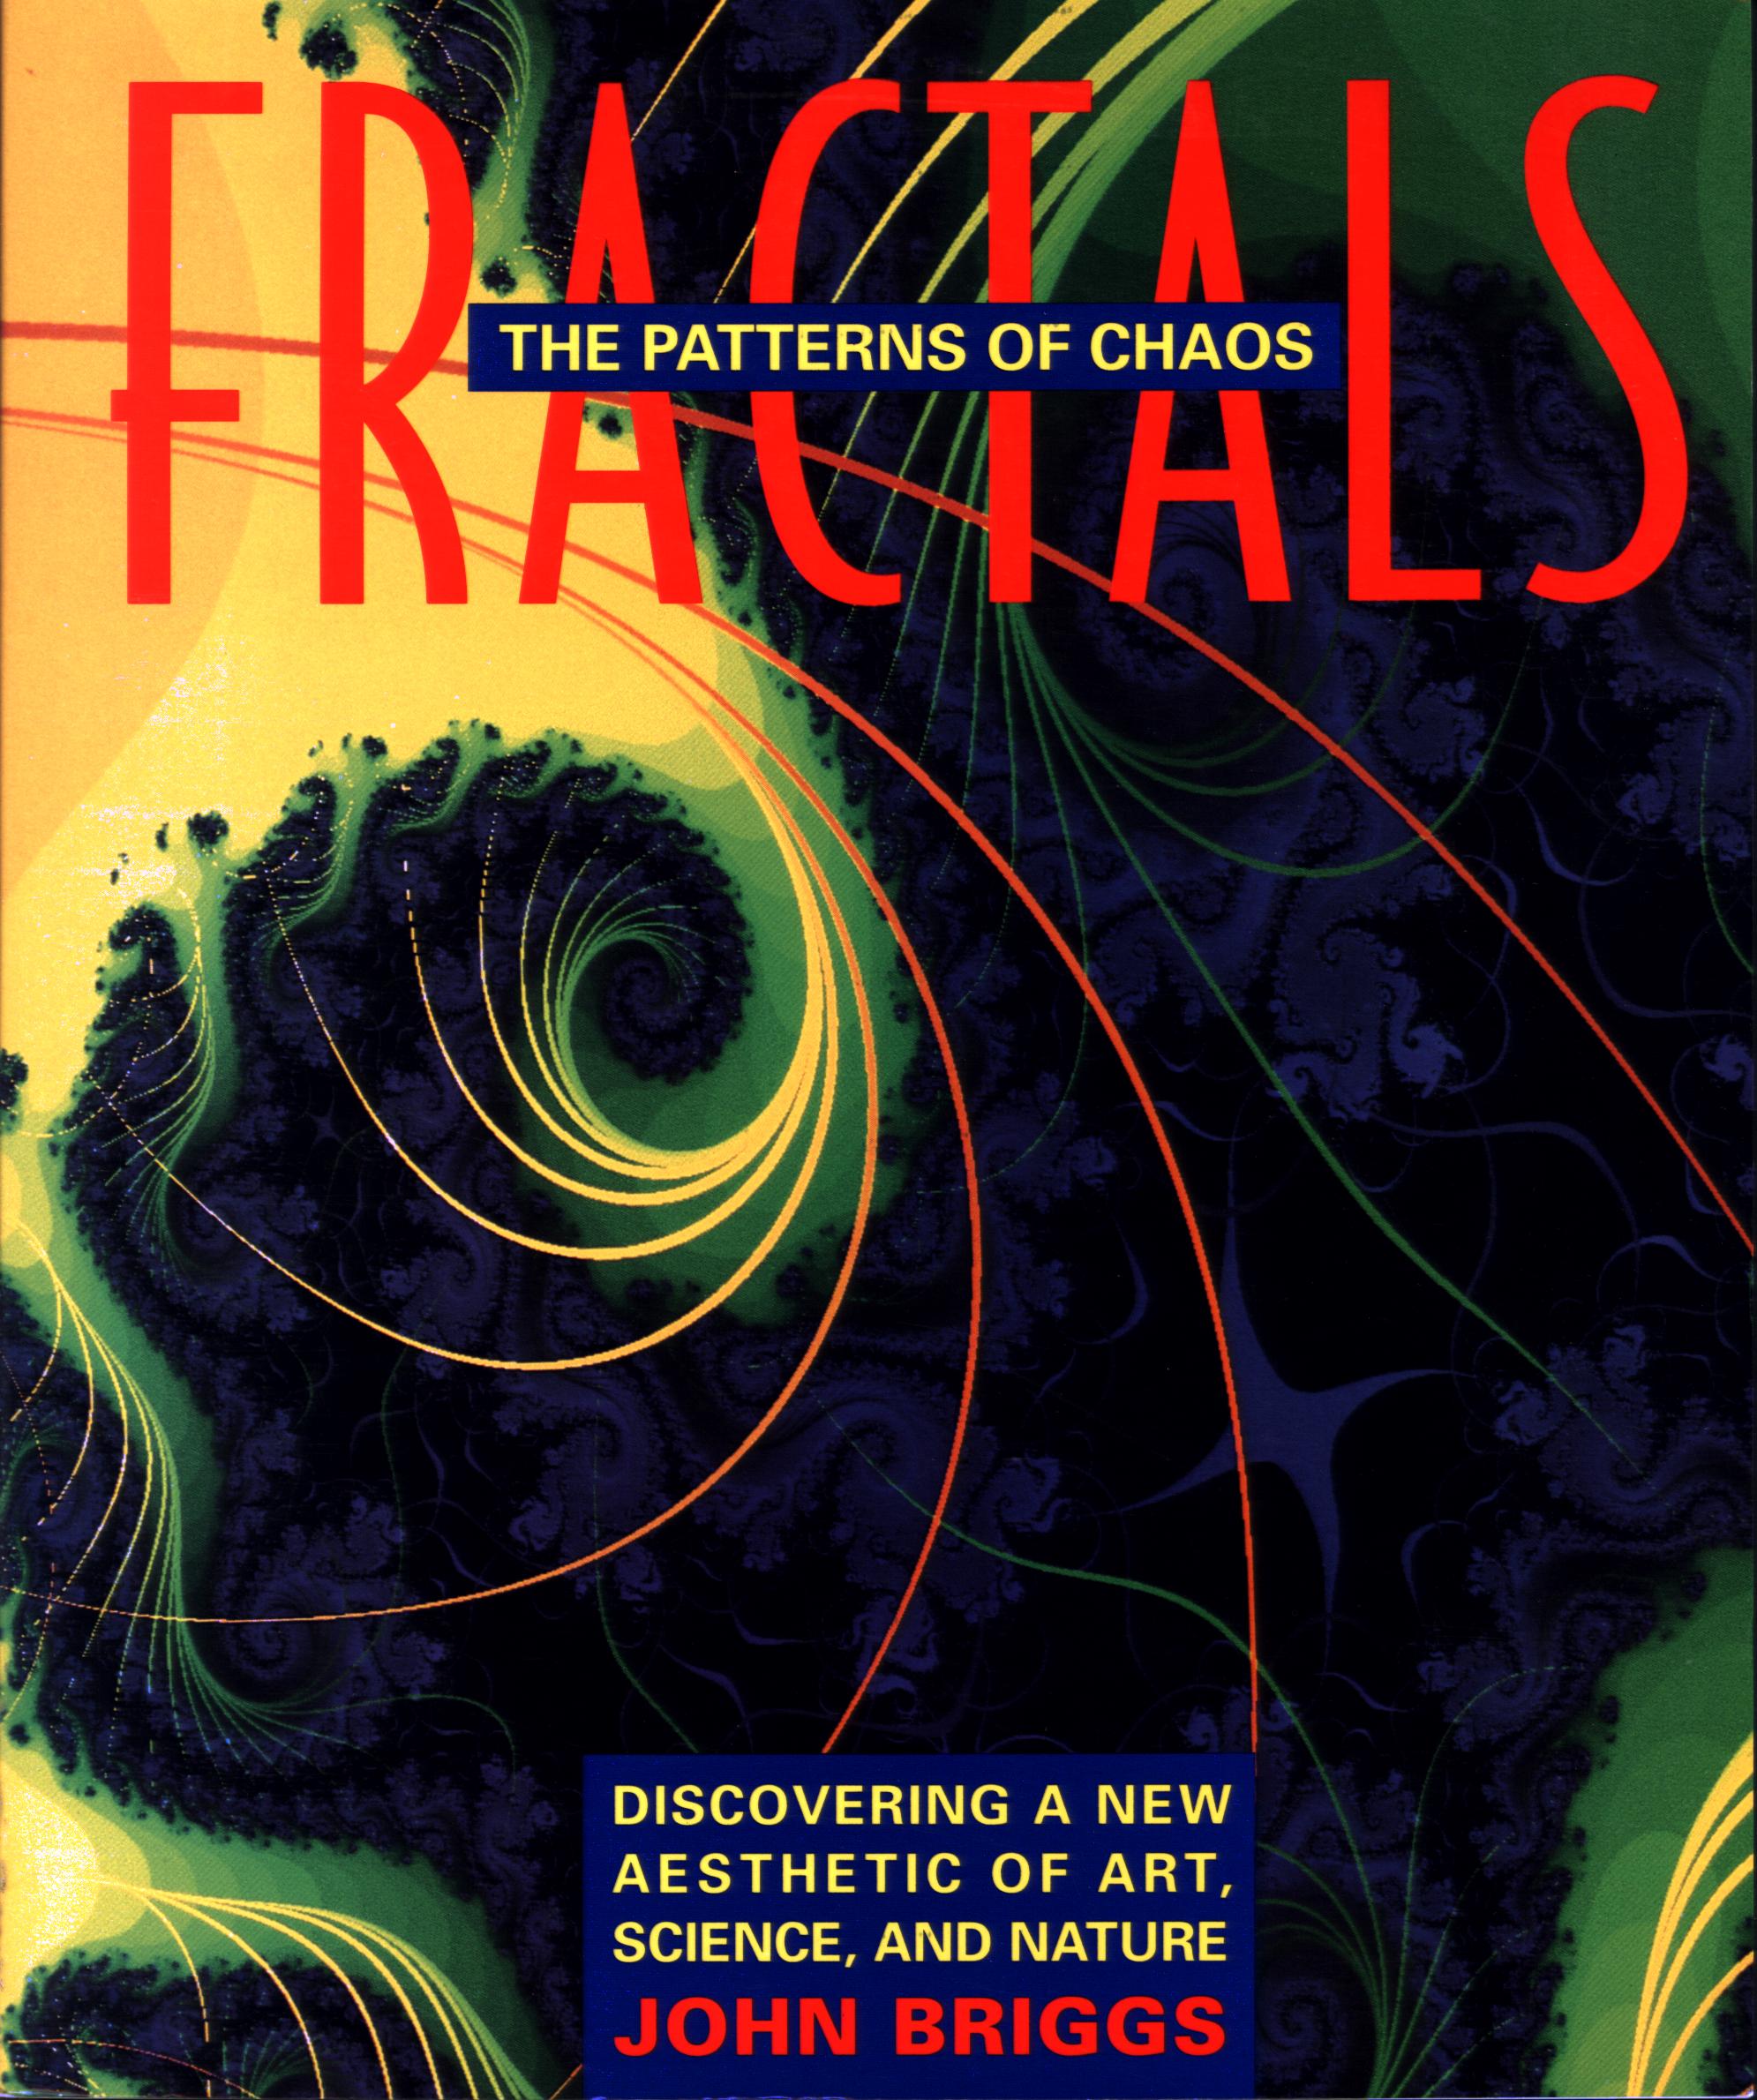 FRACTALS: THE PATTERNS OF CHAOS--discovering a new aesthetic of art, science, and nature.